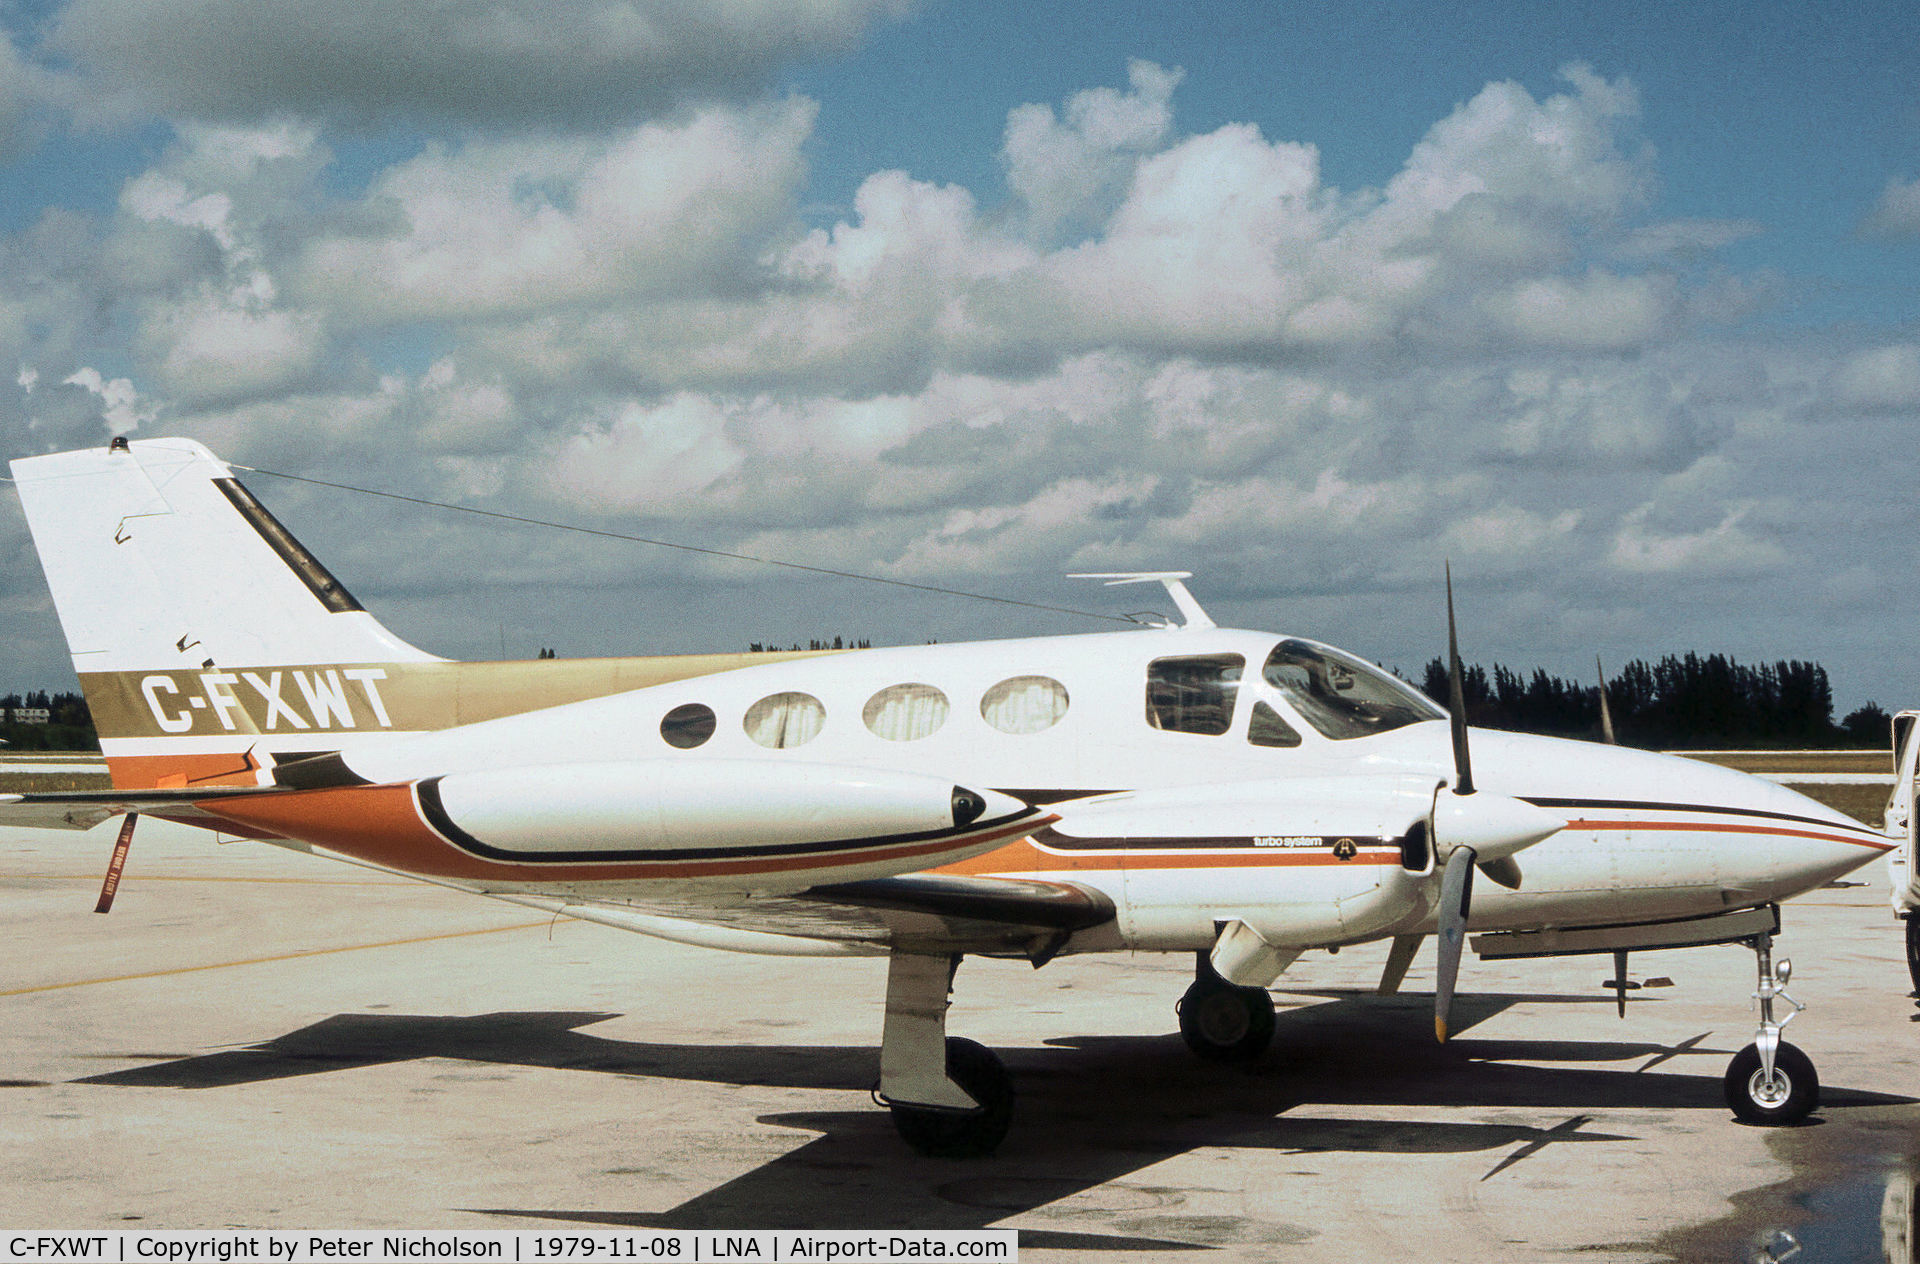 C-FXWT, 1968 Cessna 421 Golden Eagle C/N 421-0177, This Cessna 421 Golden Eagle was seen at Palm Beach County Park in November 1979.